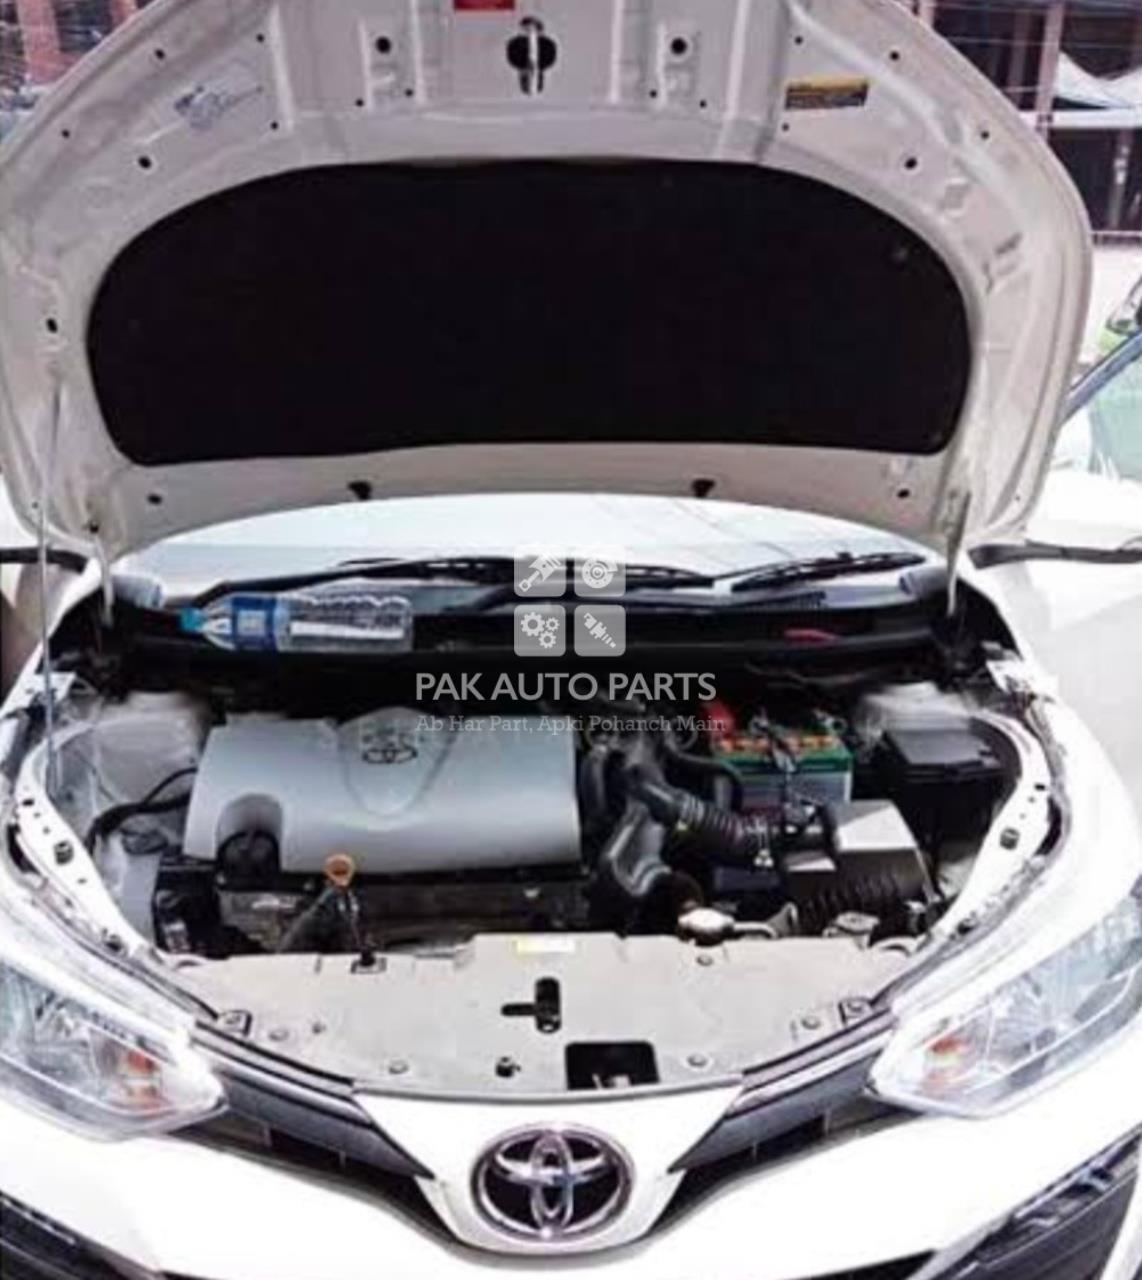 Picture of Toyota Yaris 2020~22 Bonnet Hood Insulator Namda Cover Protector